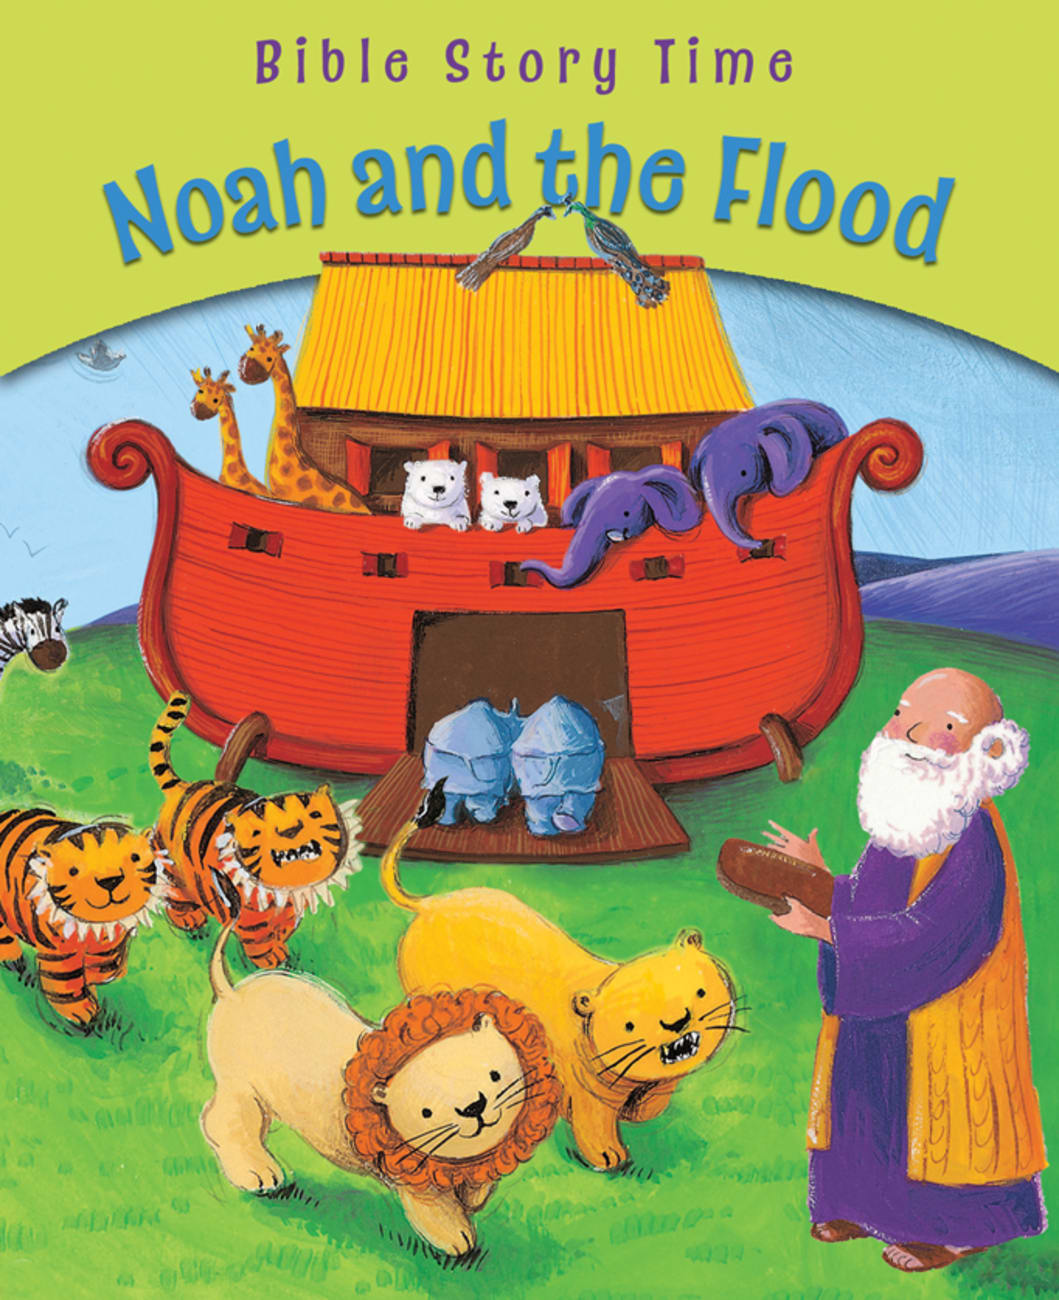 Noah and the Flood (Bible Story Time Old Testament Series) Paperback